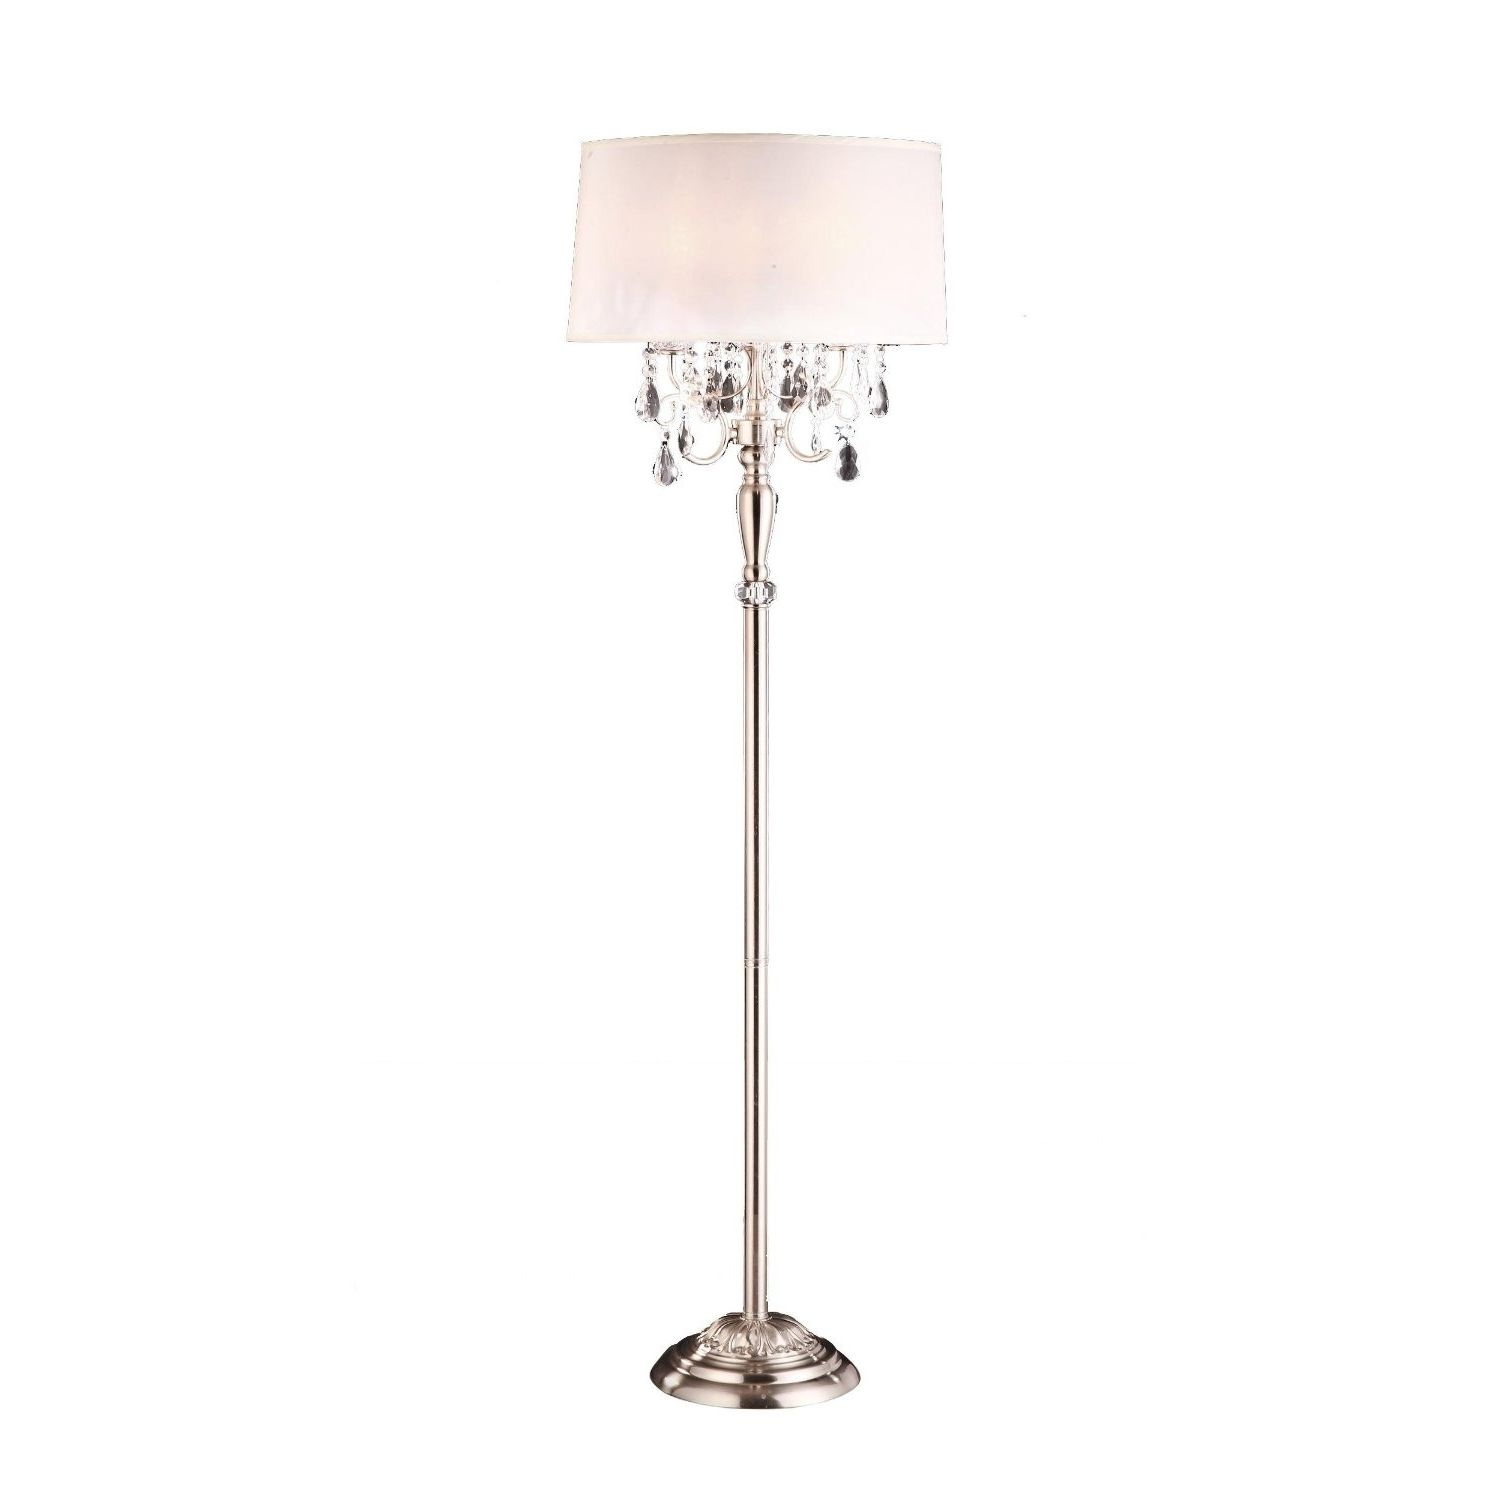 Home Design : Excellent Floor Lamp Crystal Chandelier Chrome Beaded Within Trendy Chandelier Standing Lamps (View 13 of 20)